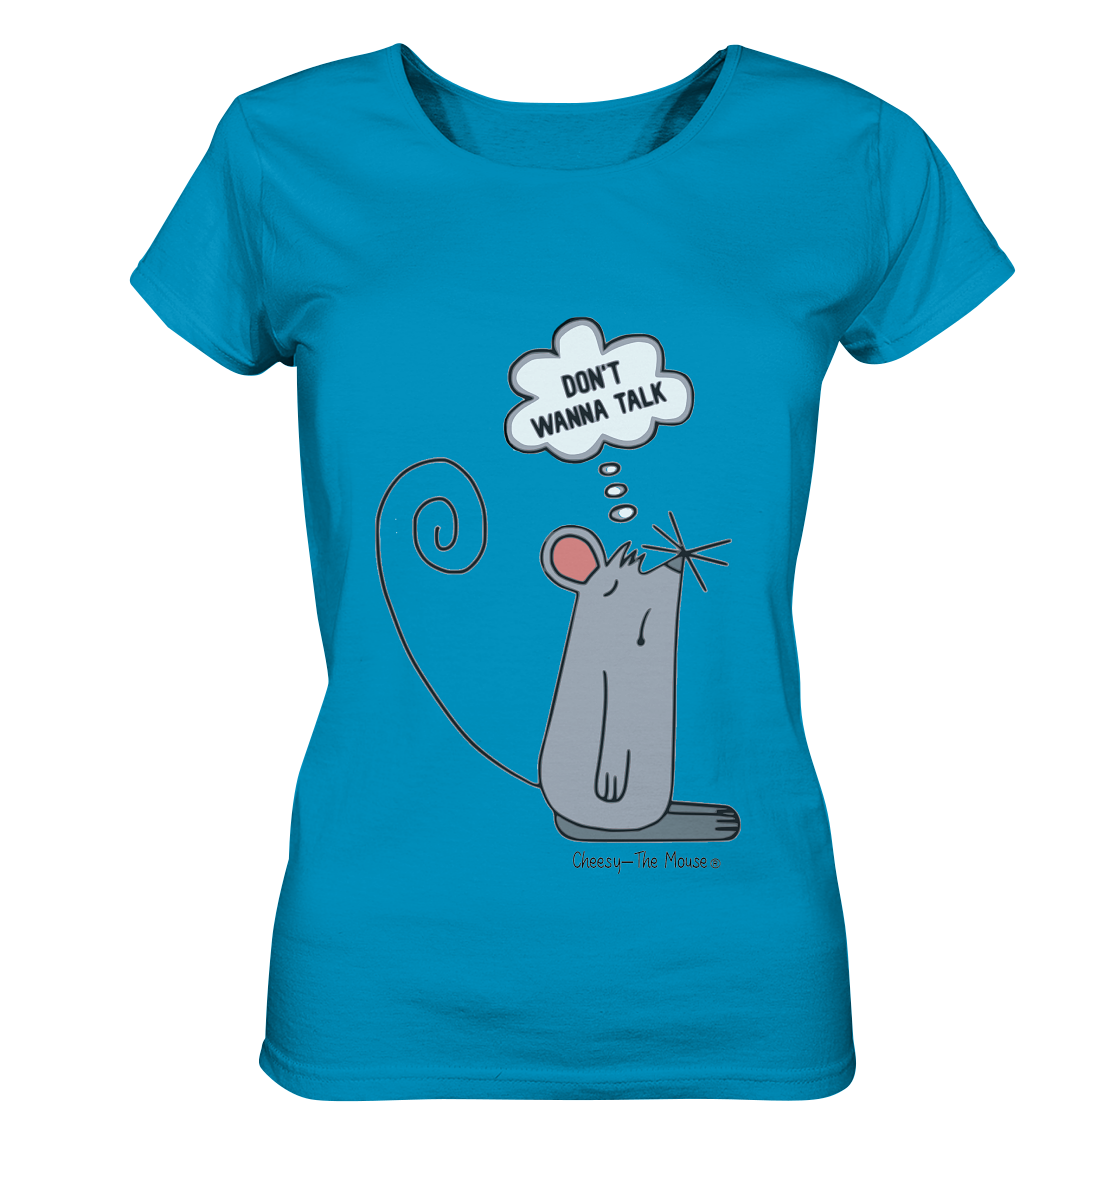 Cheesy The Mouse - Ladies Organic Shirt